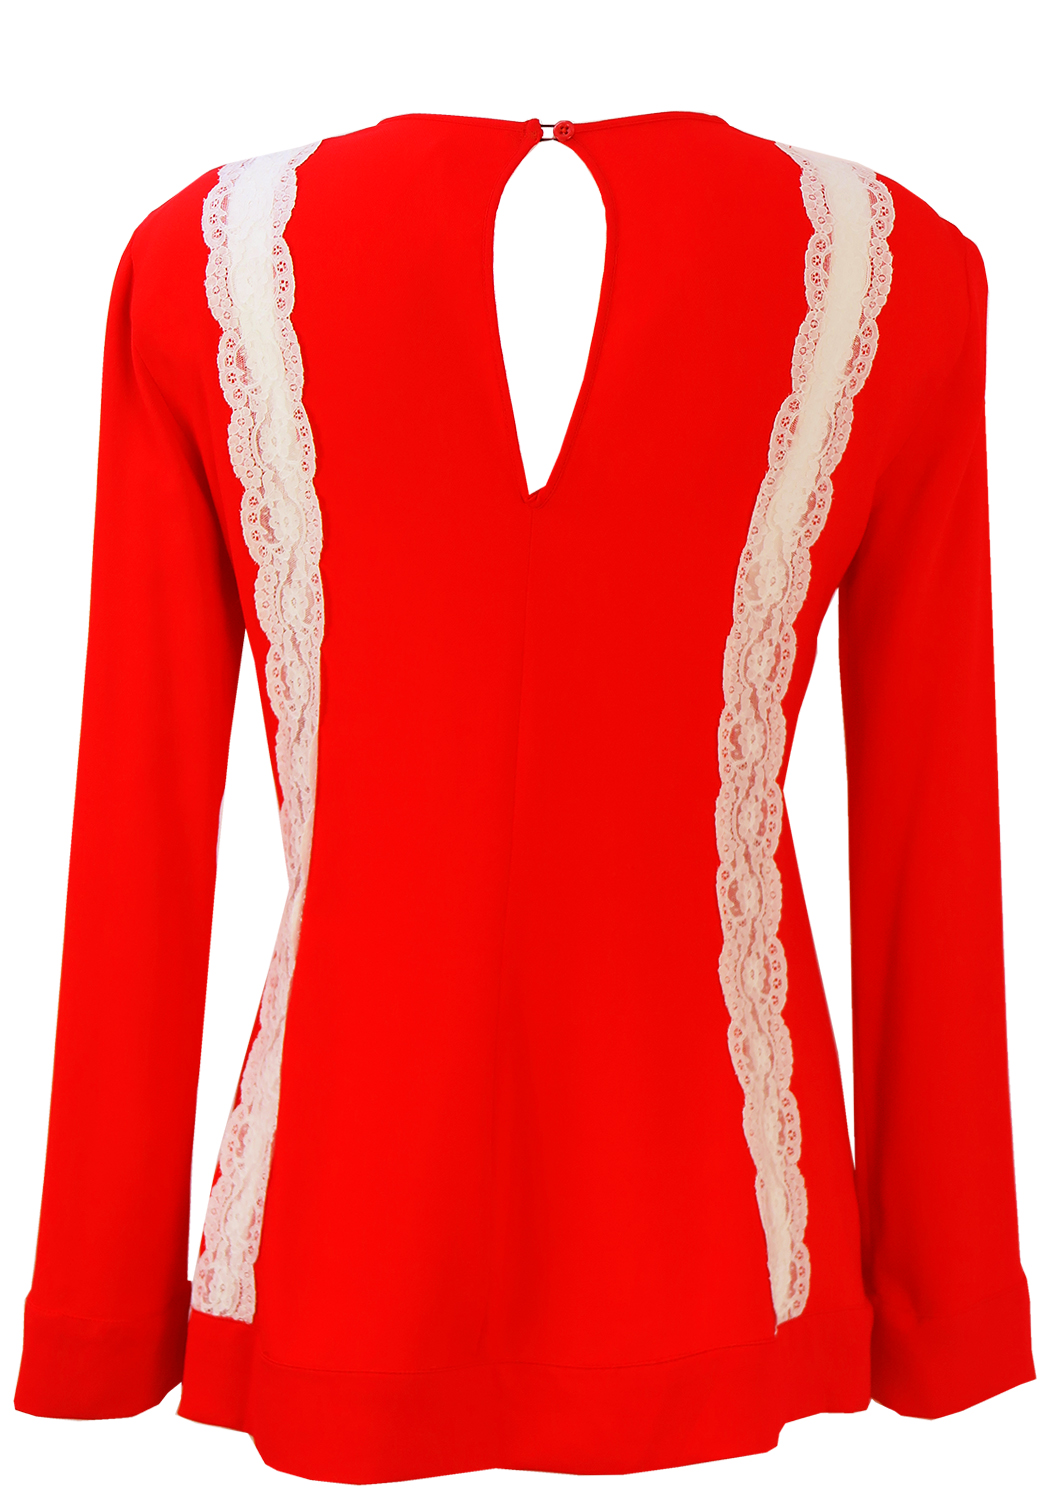 Red Long Sleeved Top with Striped White Lace Detail - M | Reign Vintage